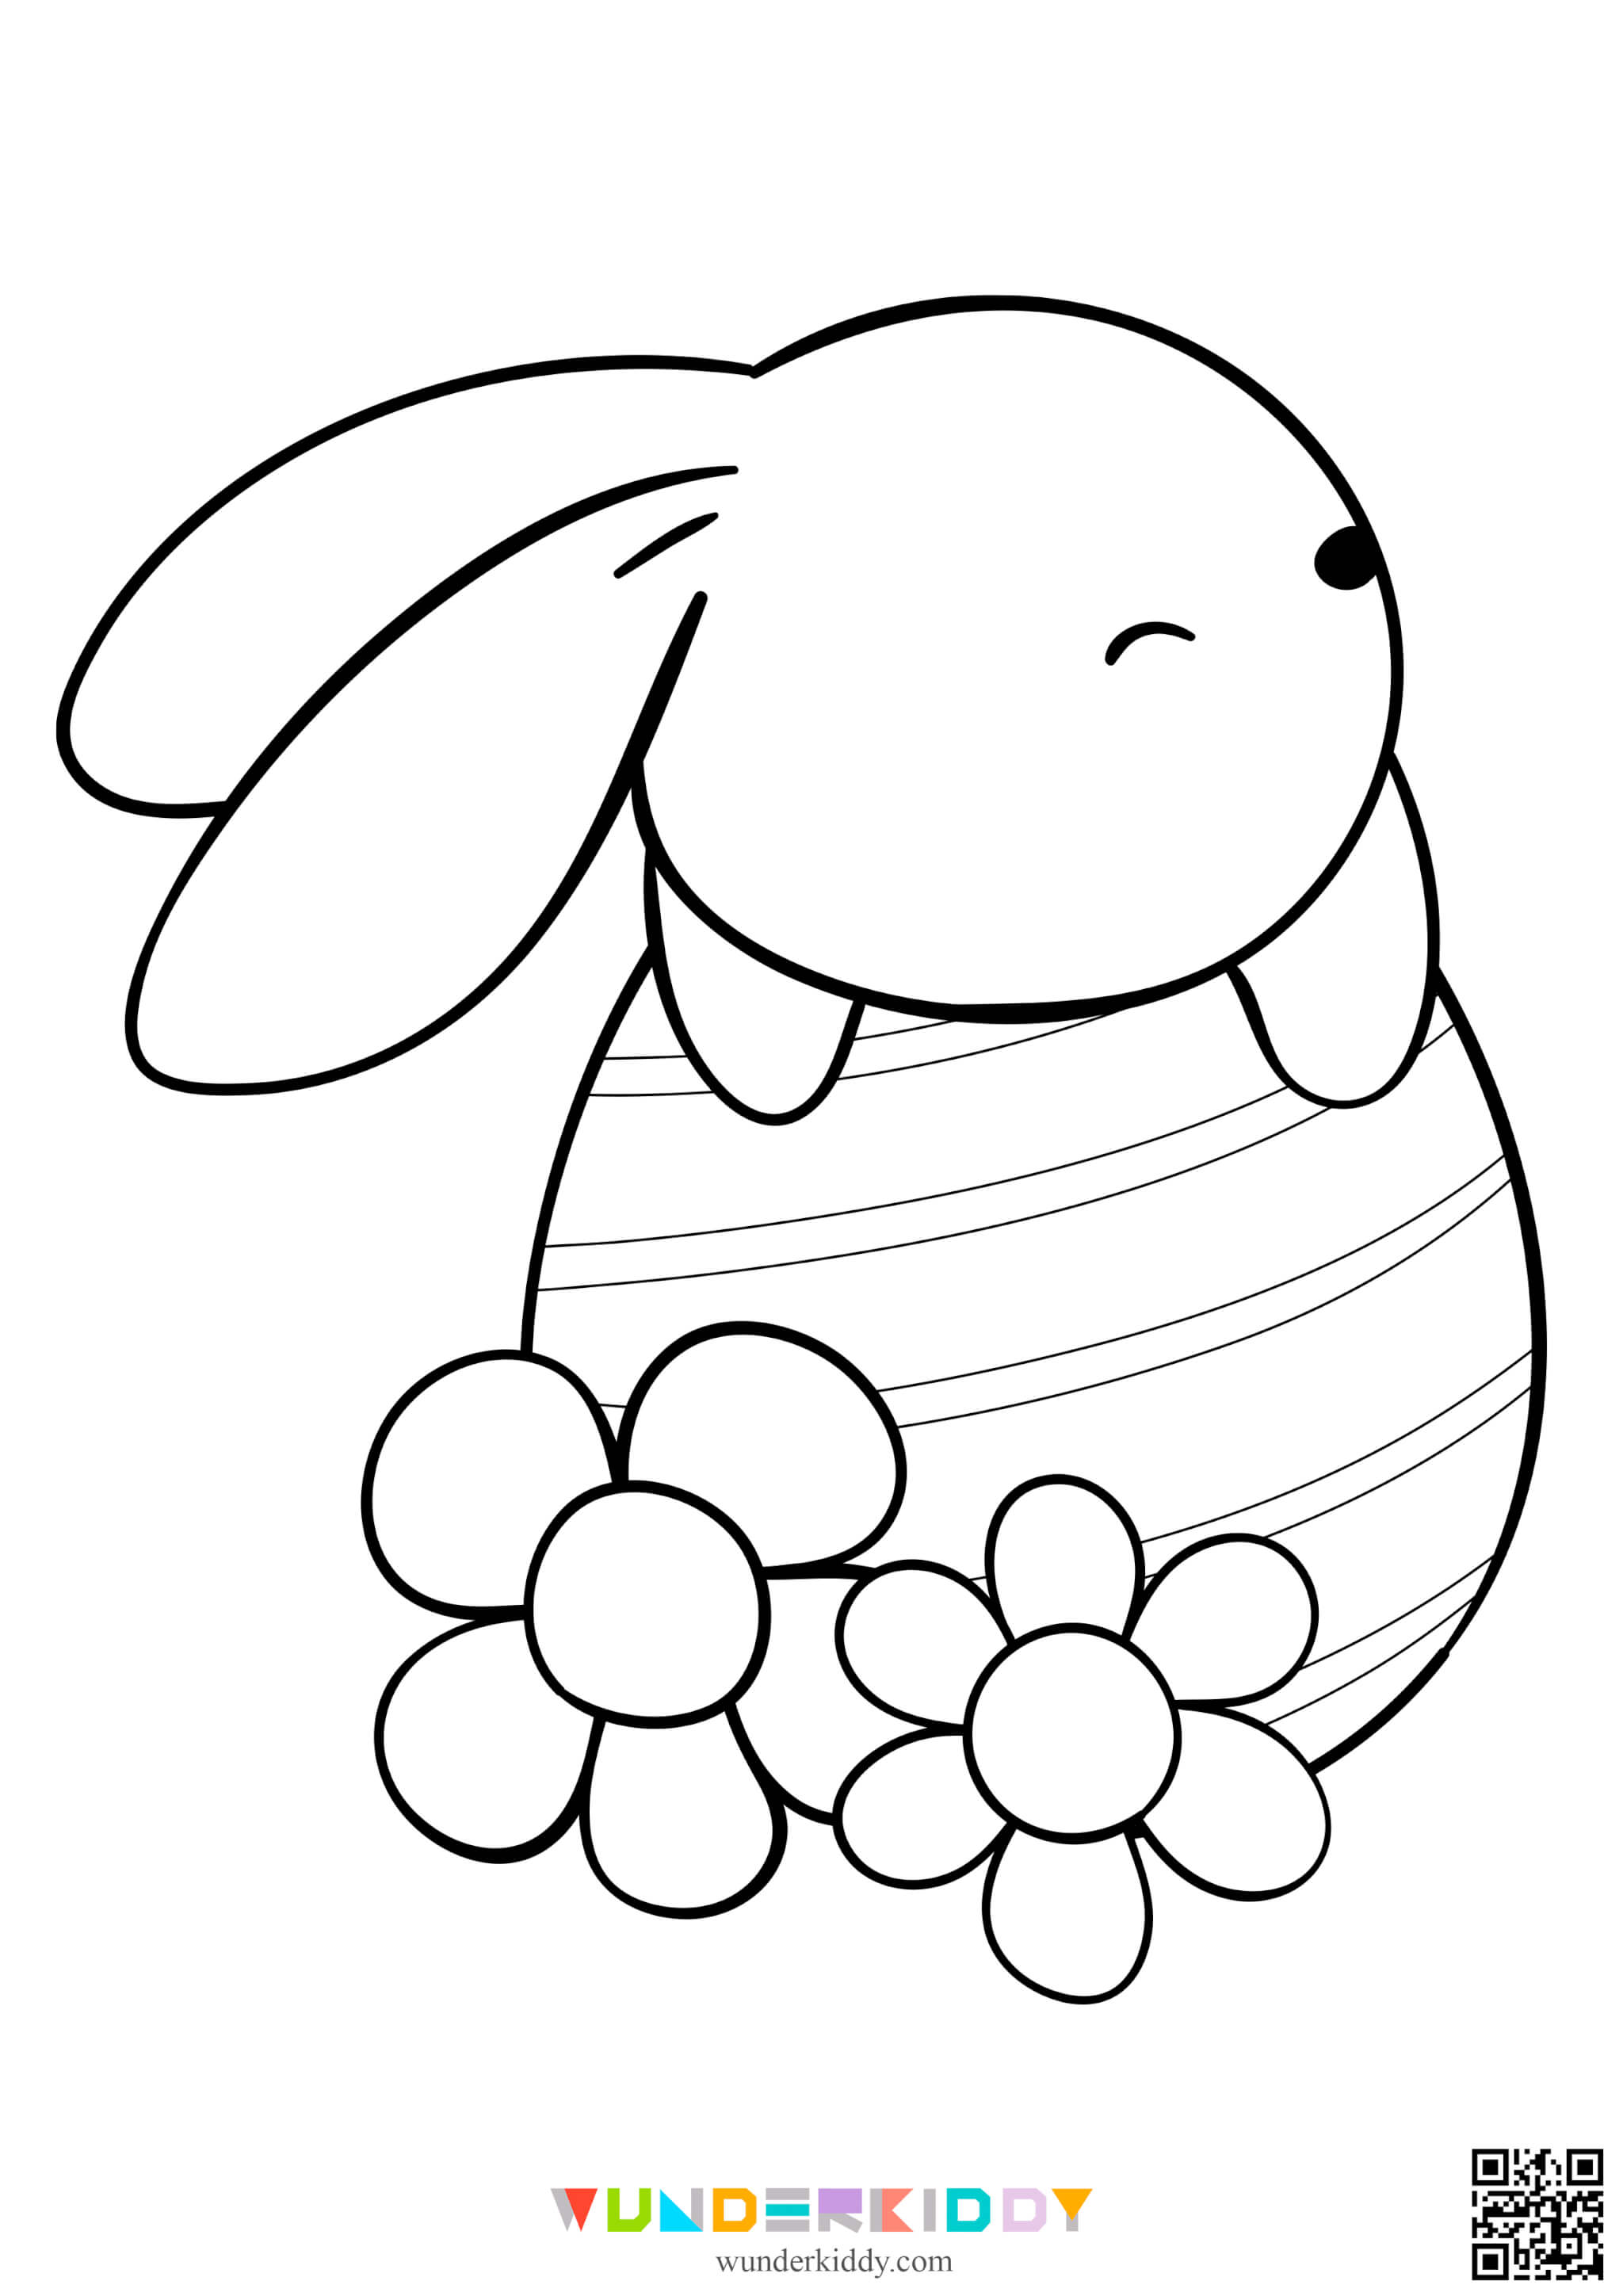 Easter Eggs Coloring Pages - Image 2